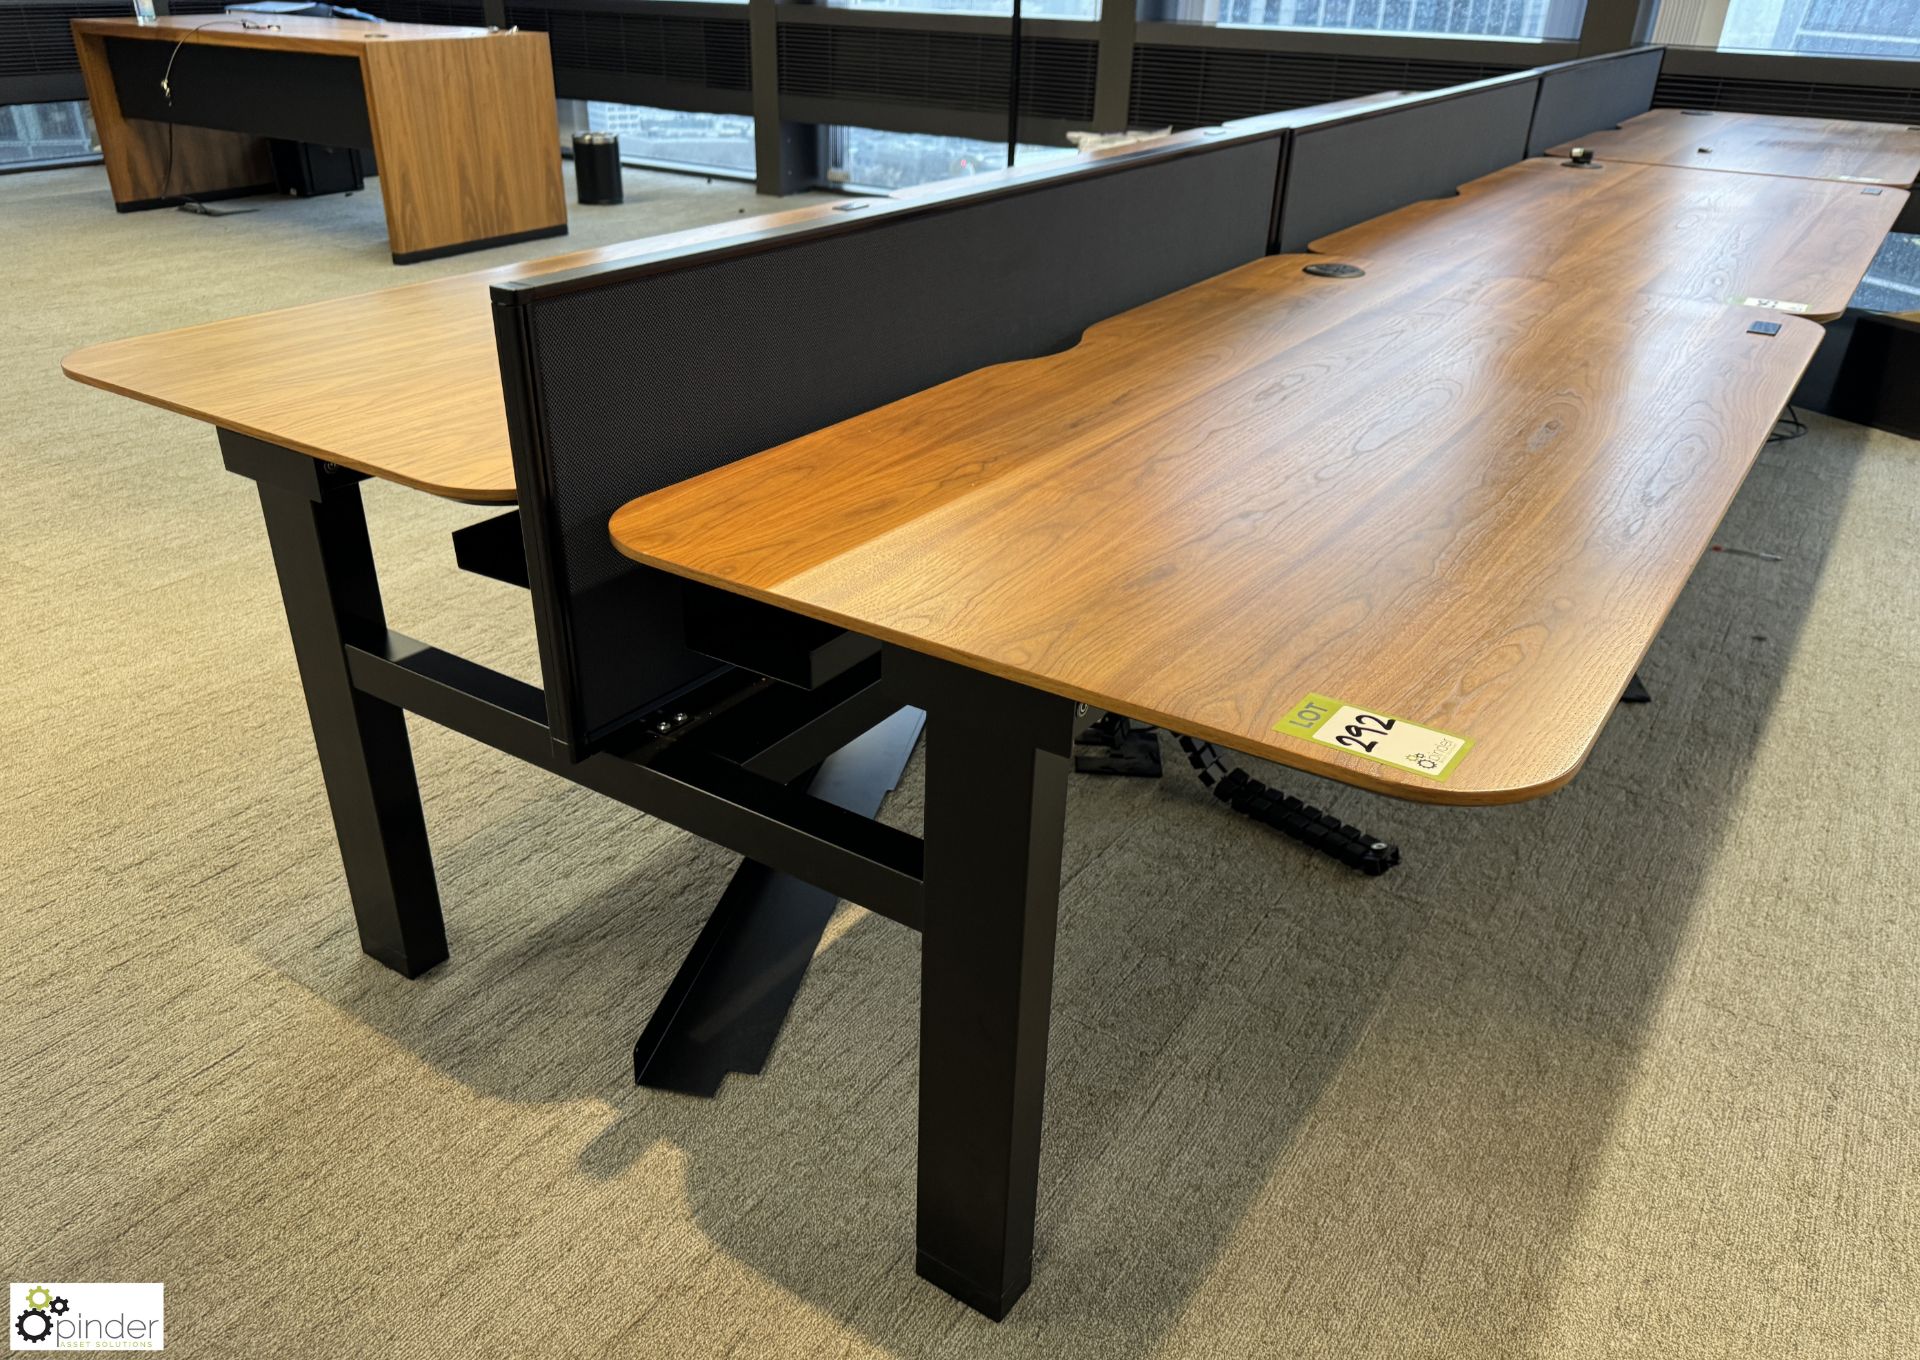 OMT back to back powered rise and fall Desks, 1600mm x 800mm per desk leaf, cherry veneer,with - Image 2 of 5